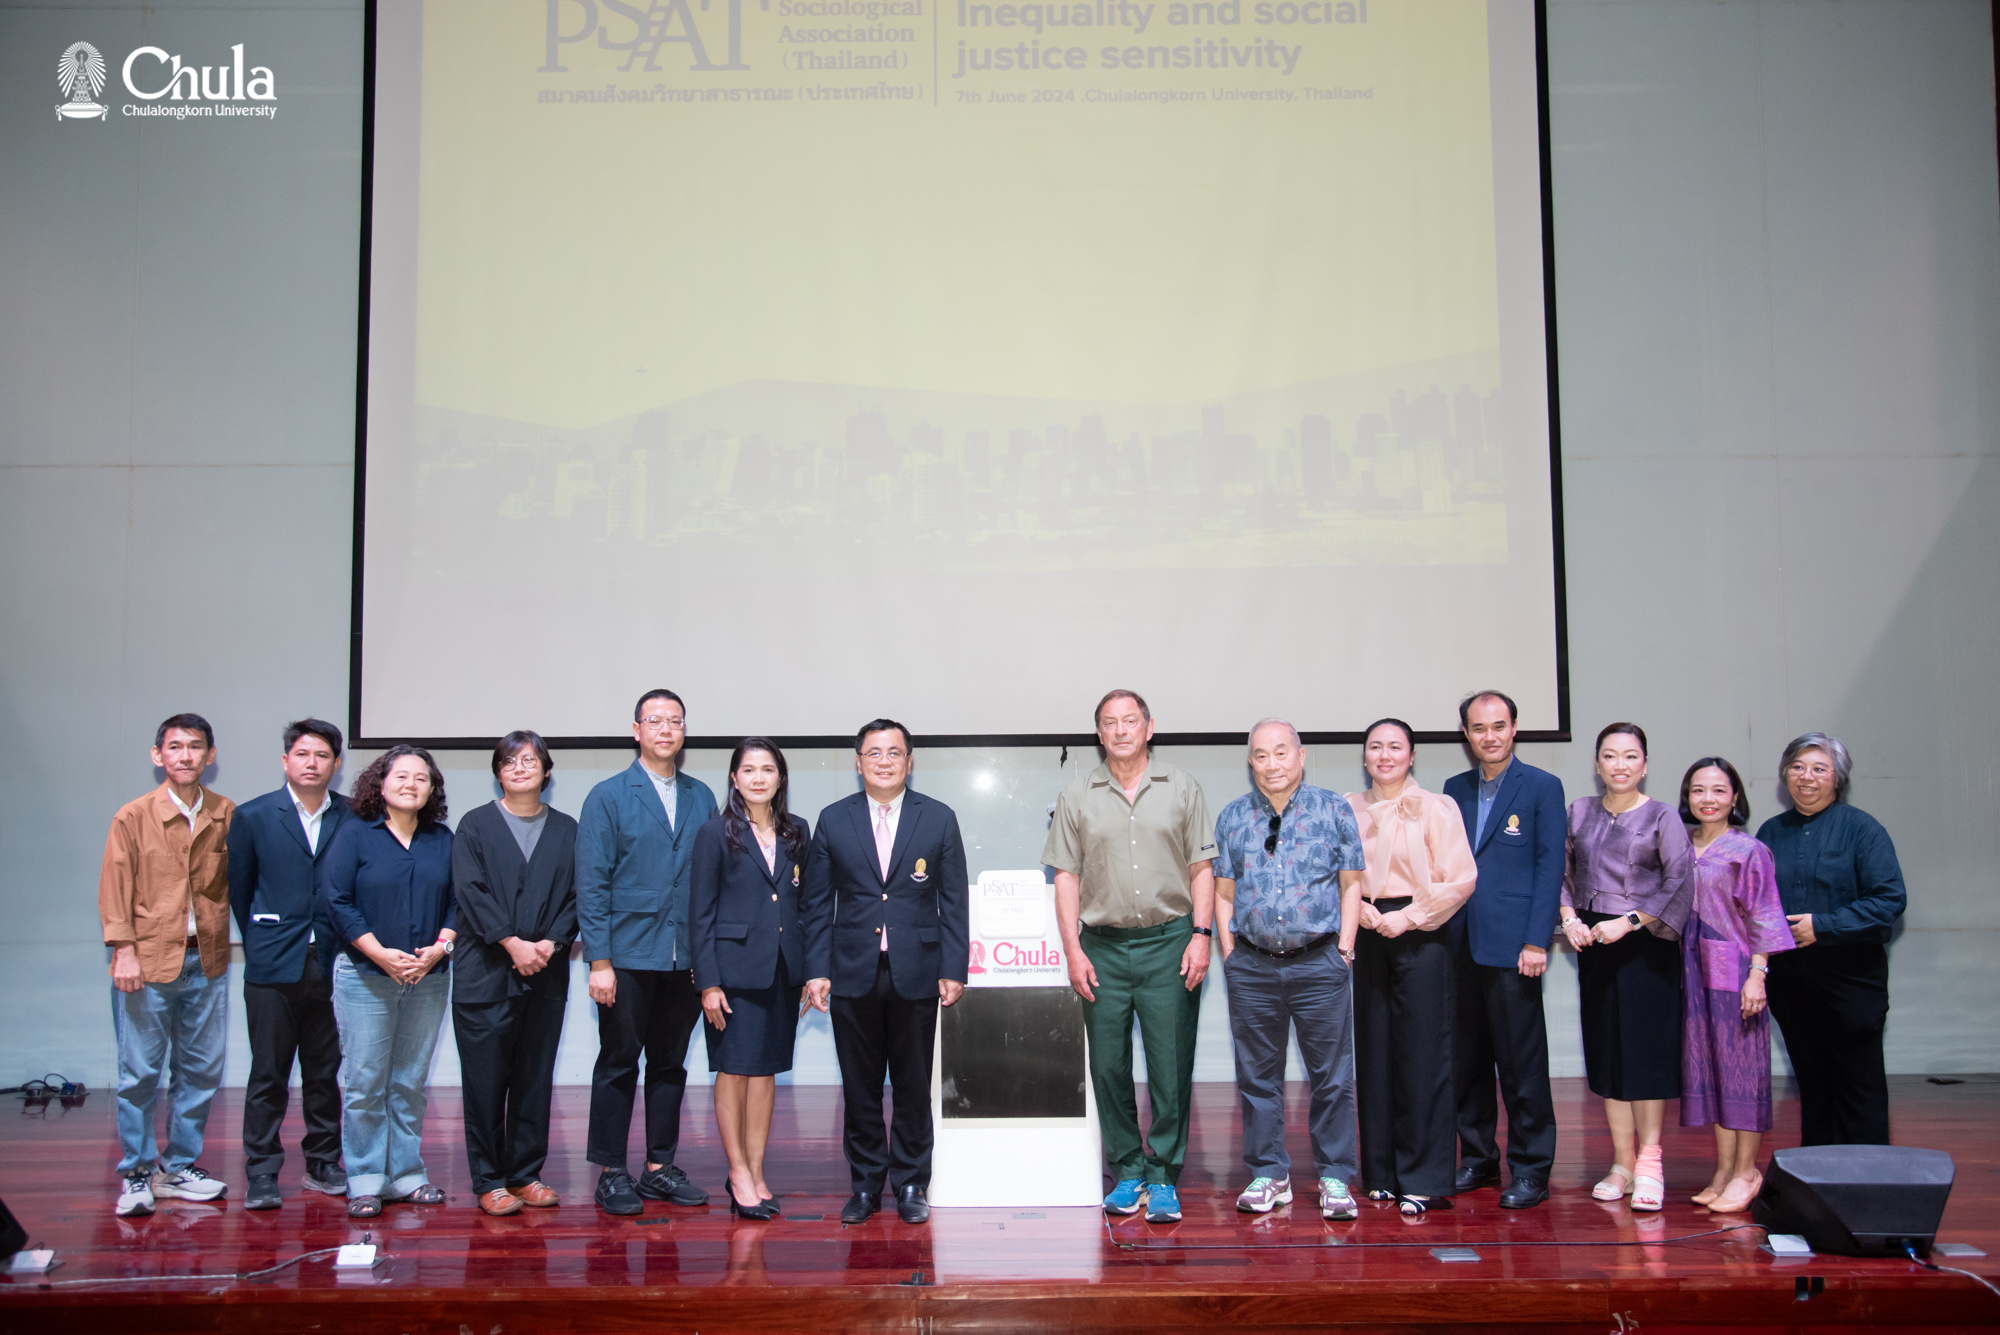 The 1st PSAT International Conference on Inequality and Social Justice Sensitivity 